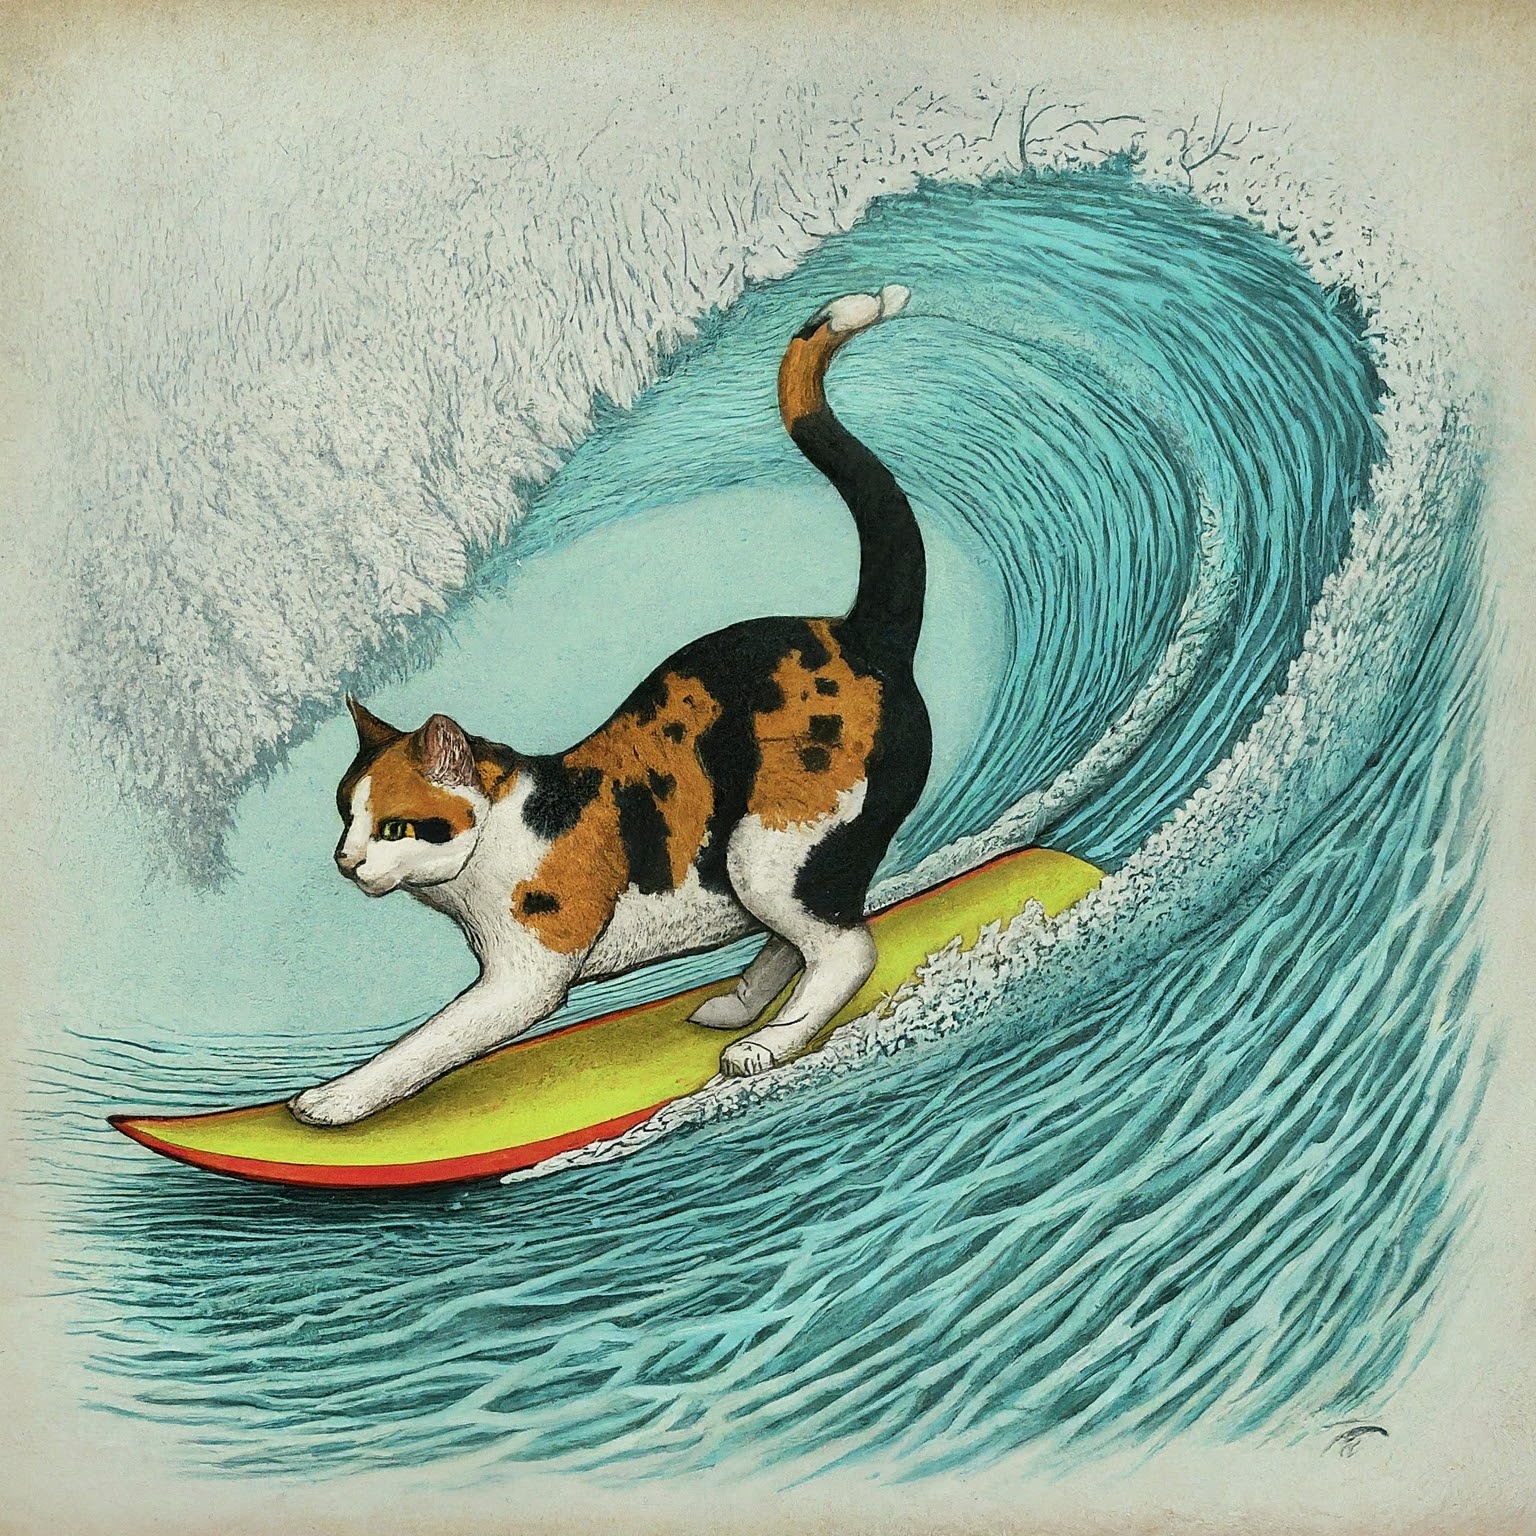 Cats Surfing On A Surfboard.